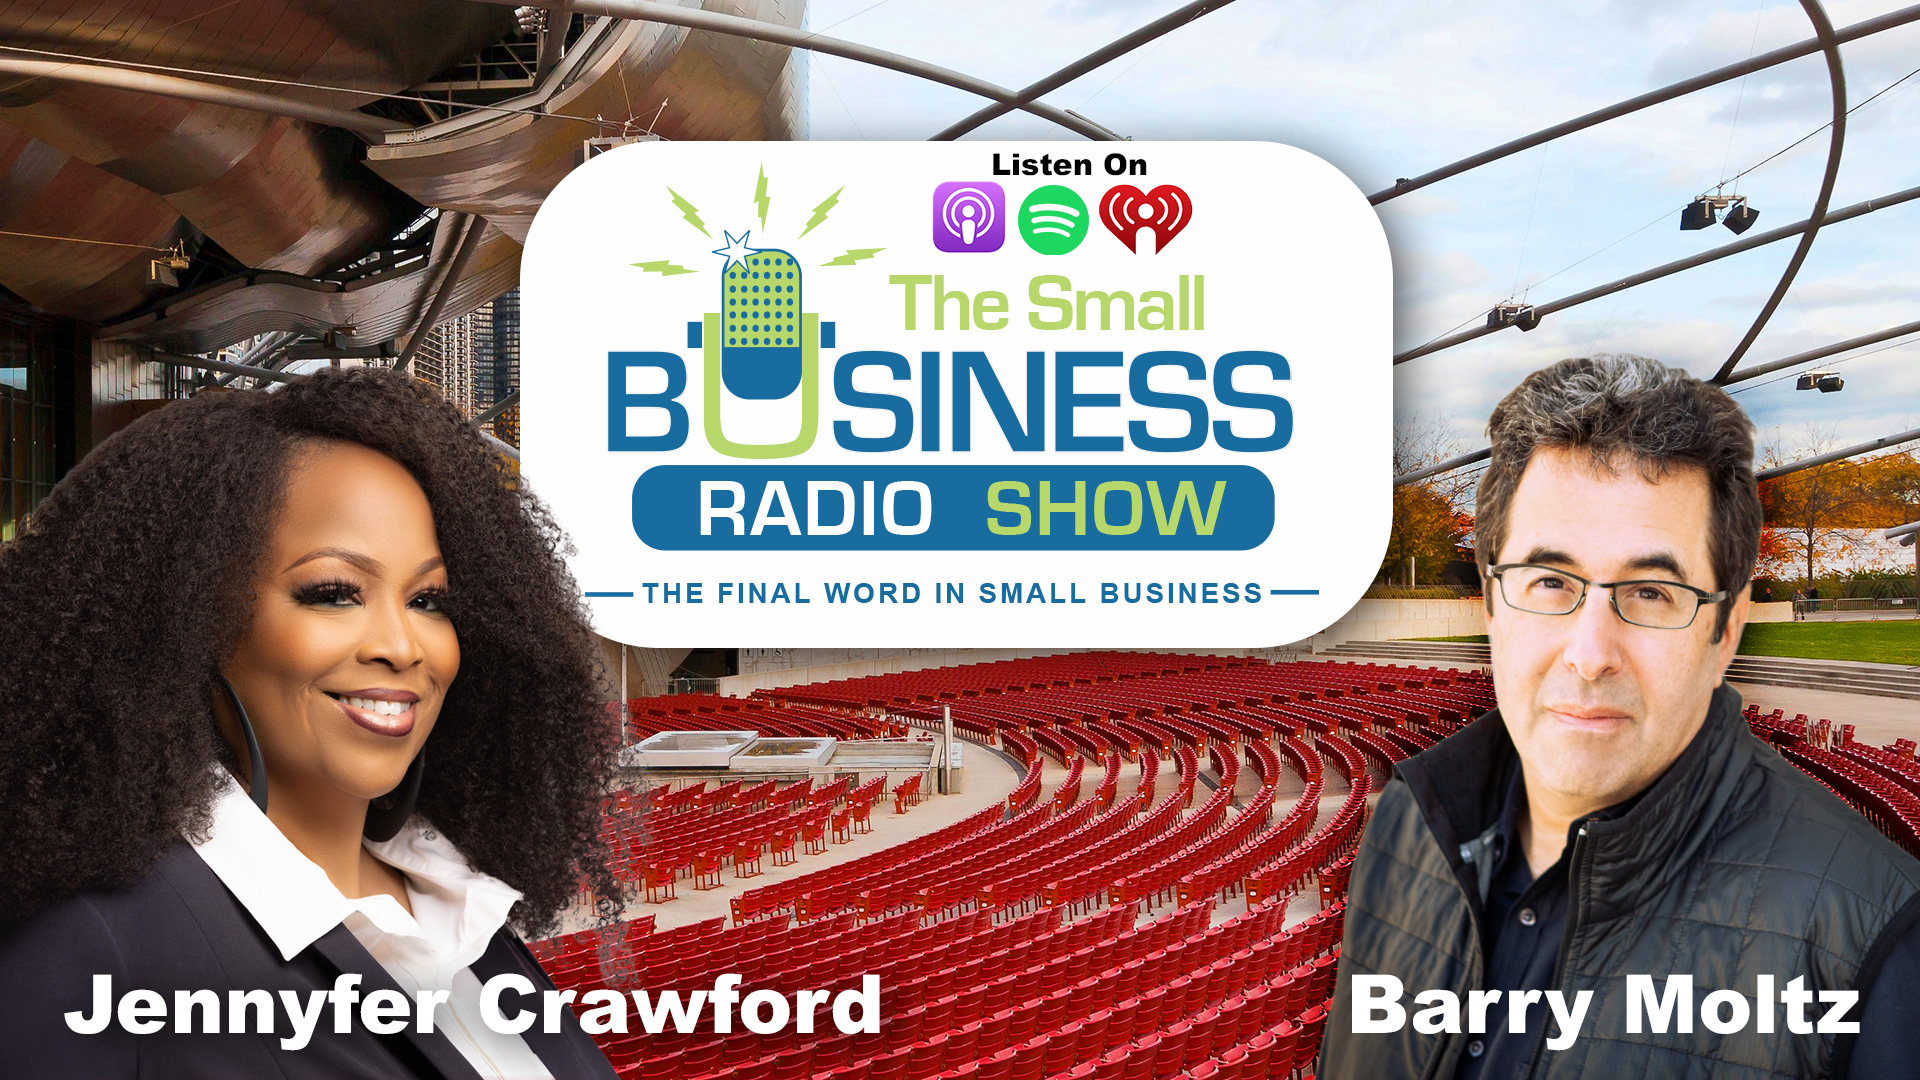 Jennyfer Crawford on The Small Business Radio Show